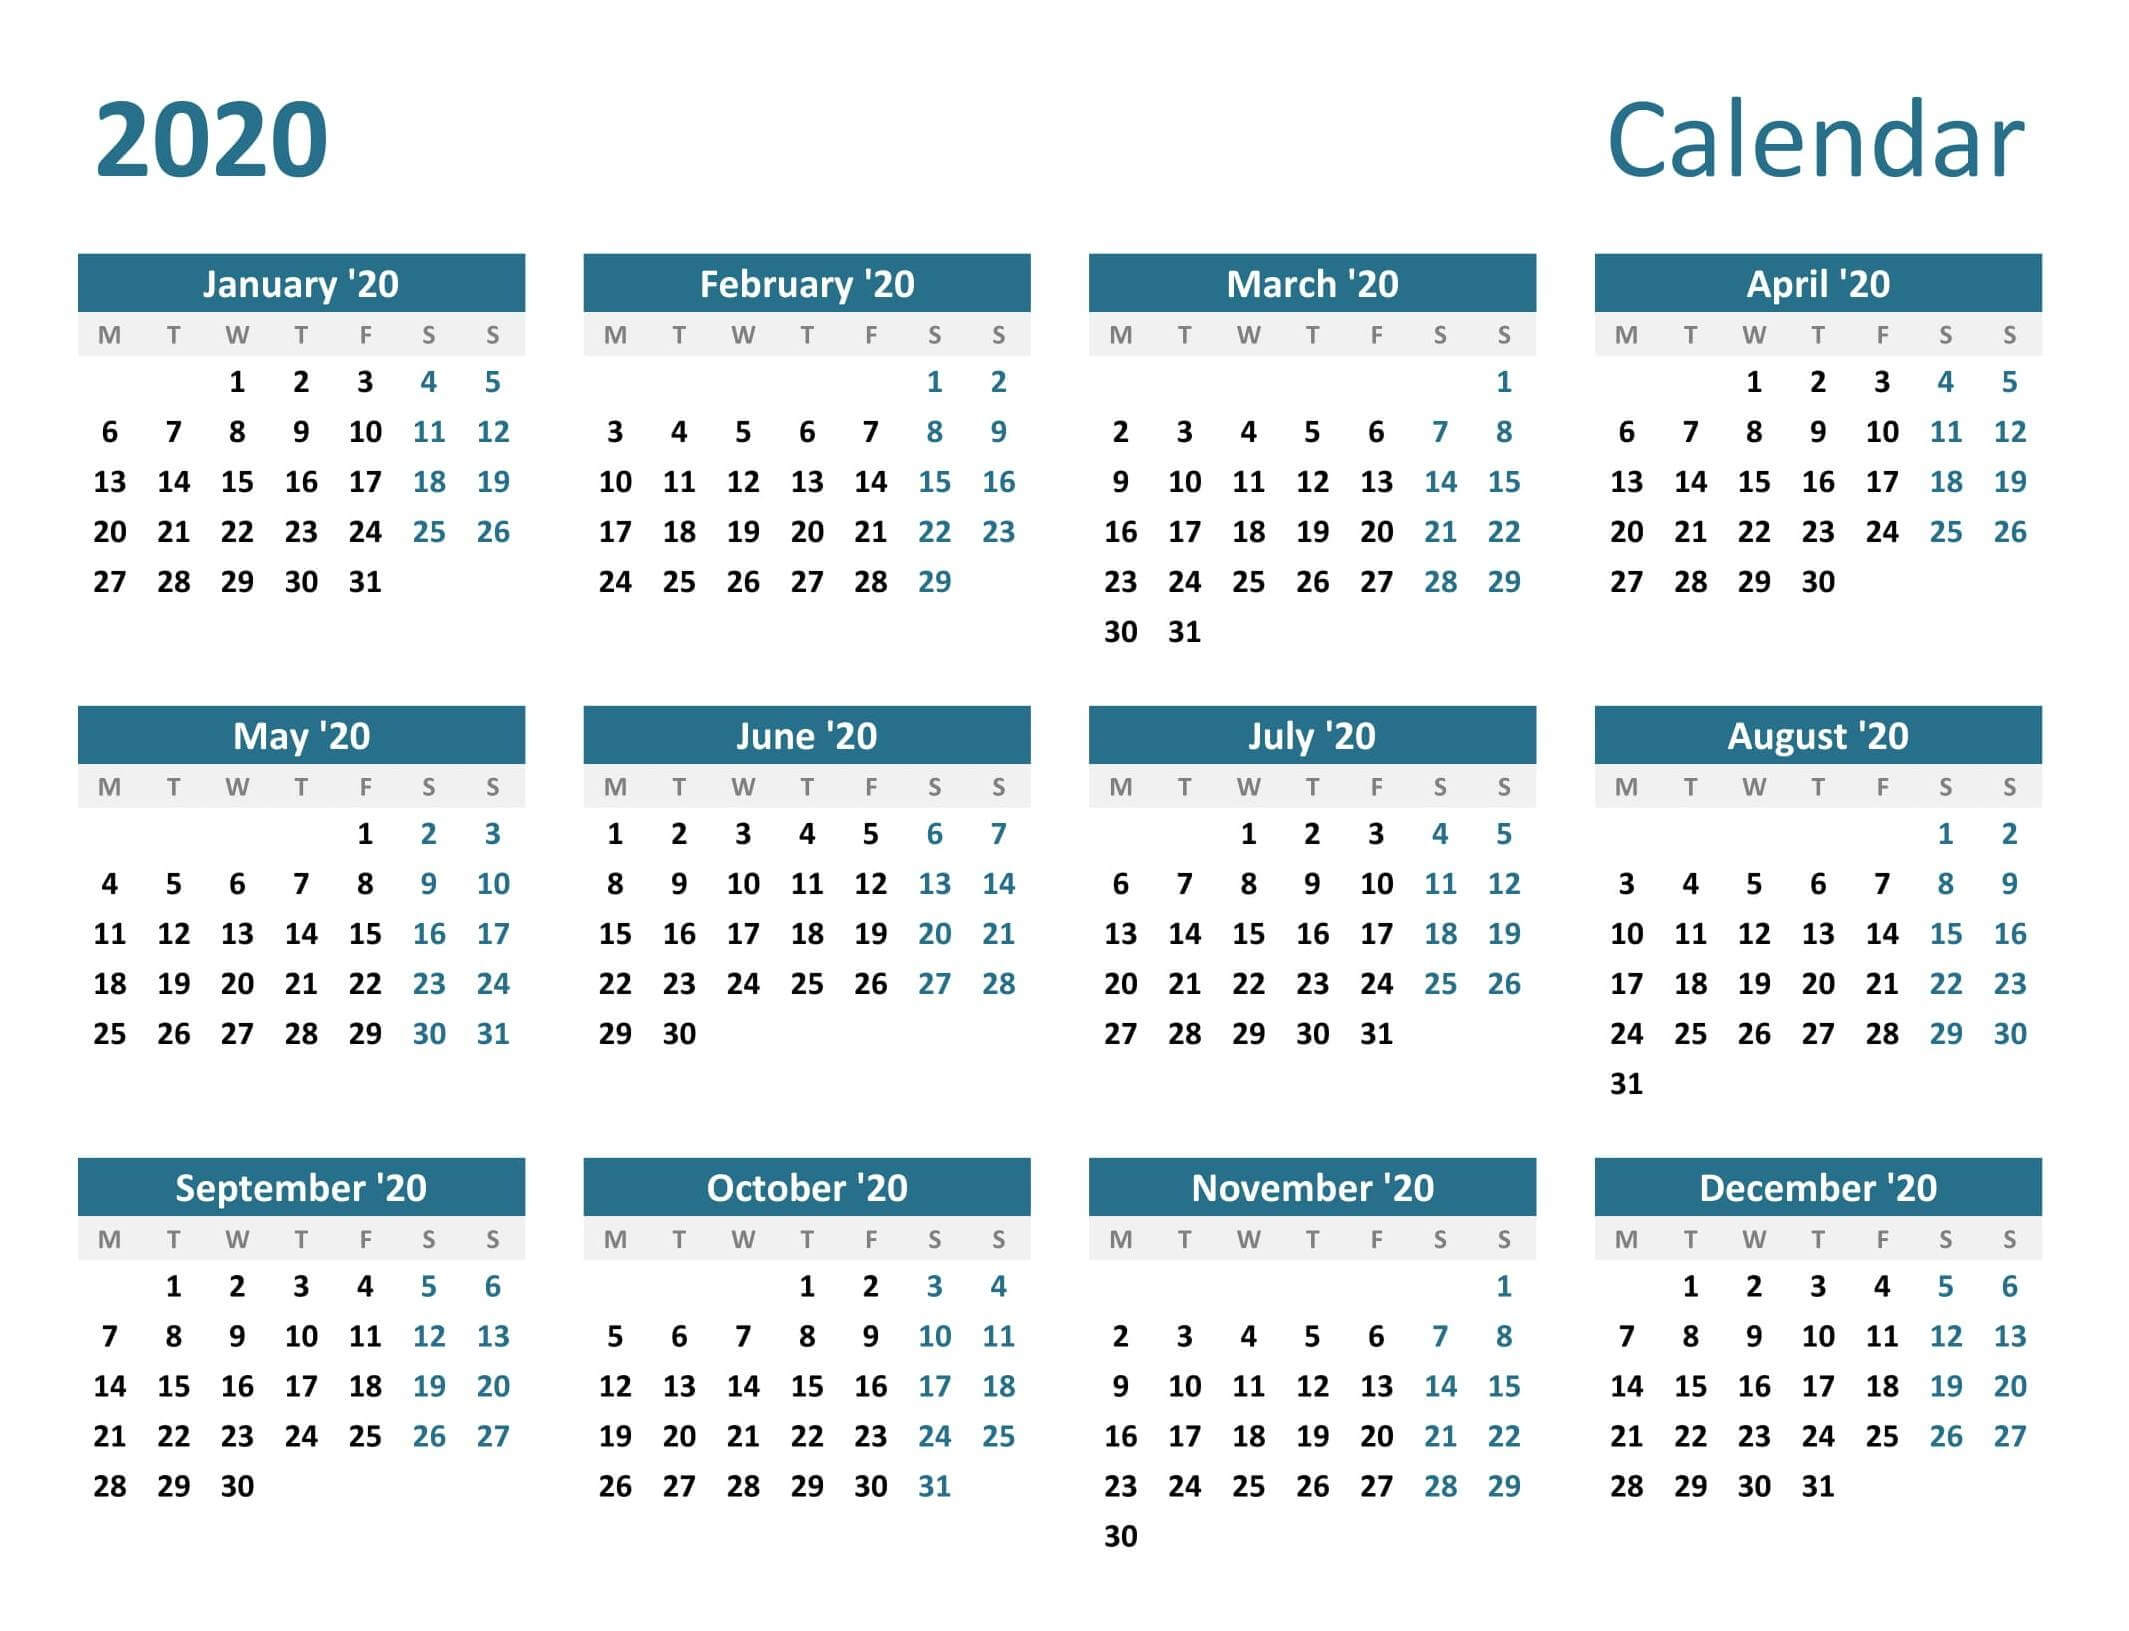 Yearly Calendar With Notes 2020 Pdf - 2019 Calendars For